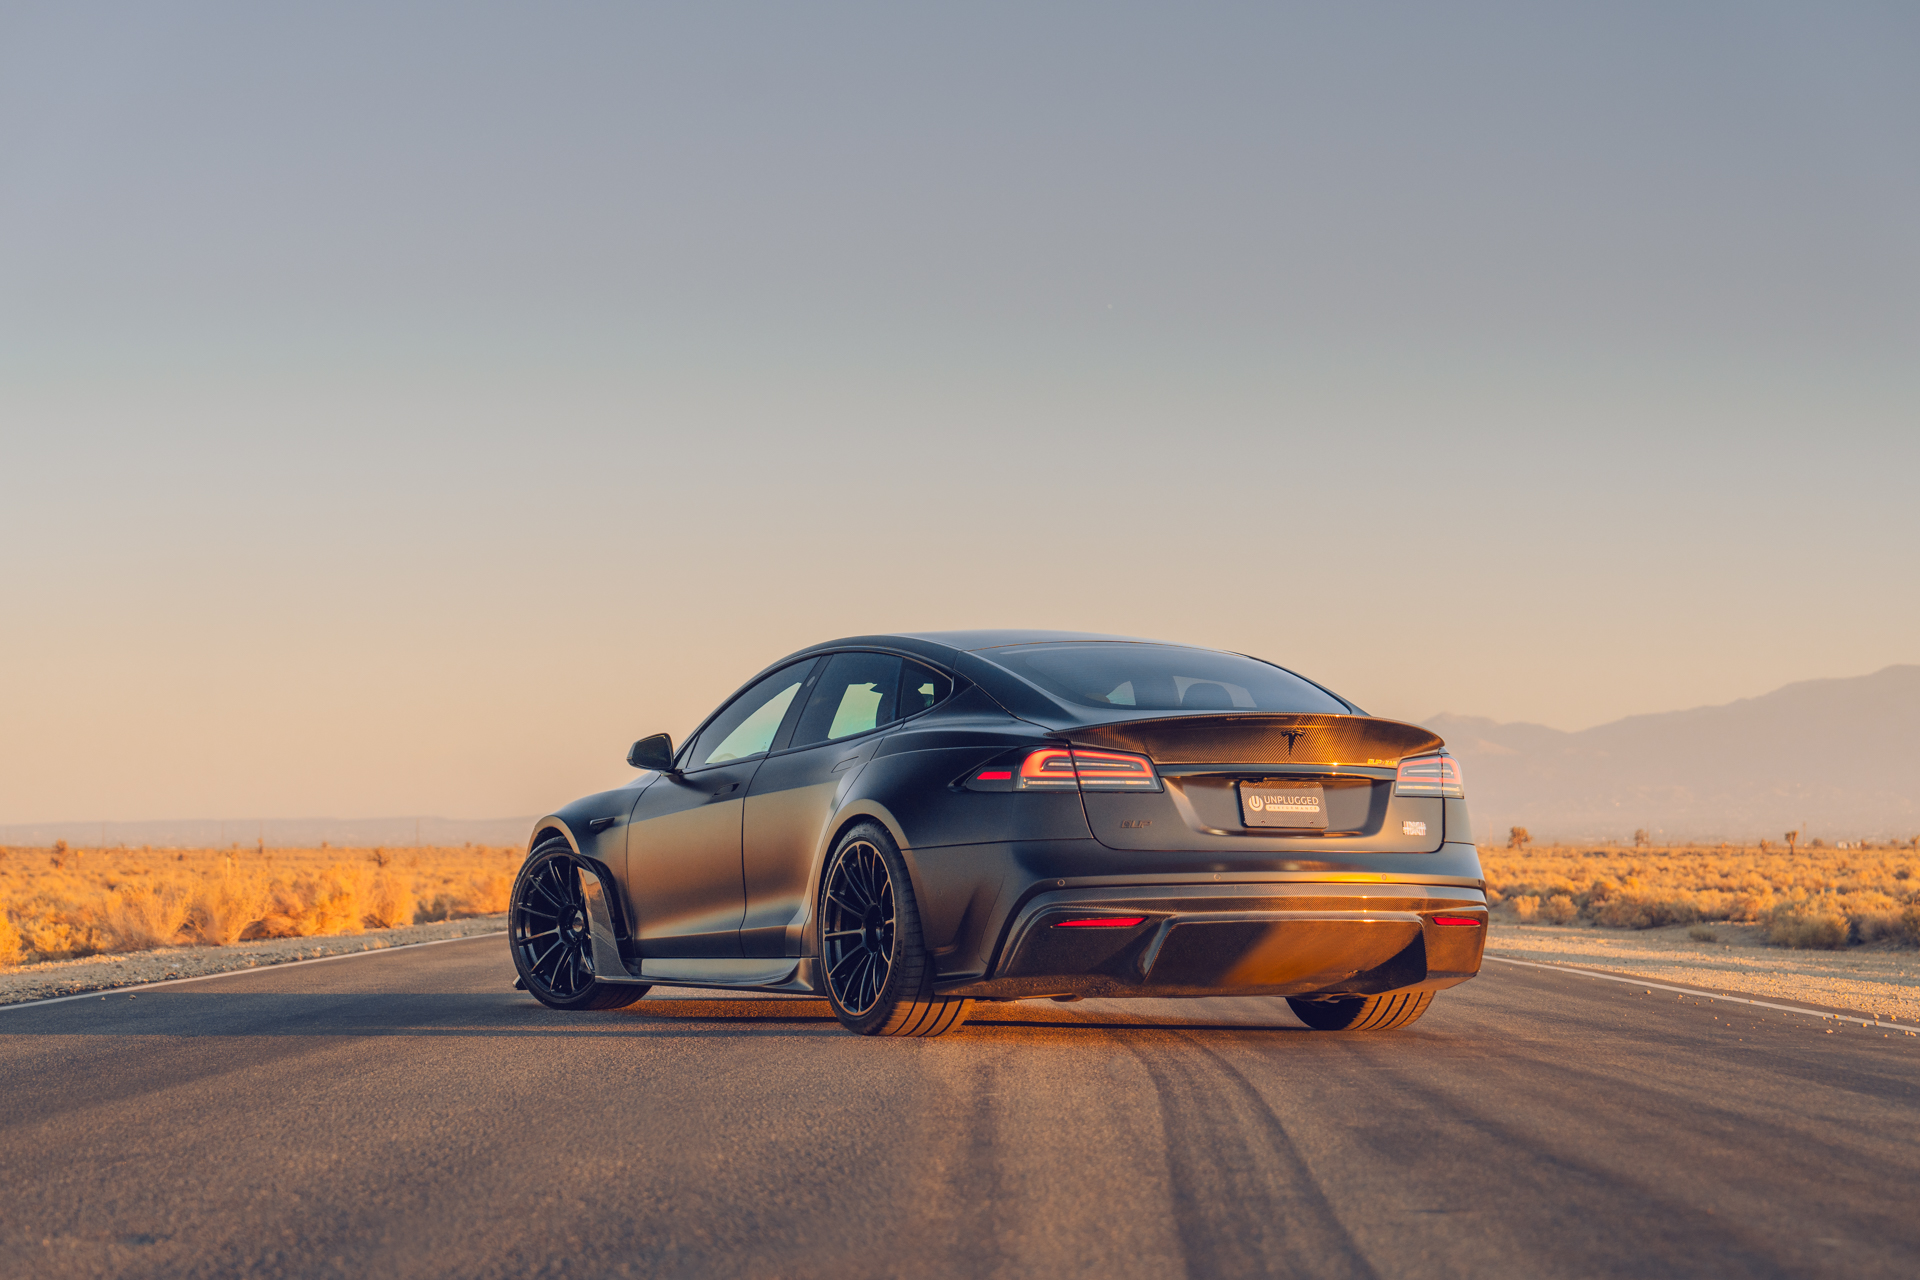 Competition Carbon's Widebody Tesla Model S Plaid Throws Out The Rule Book